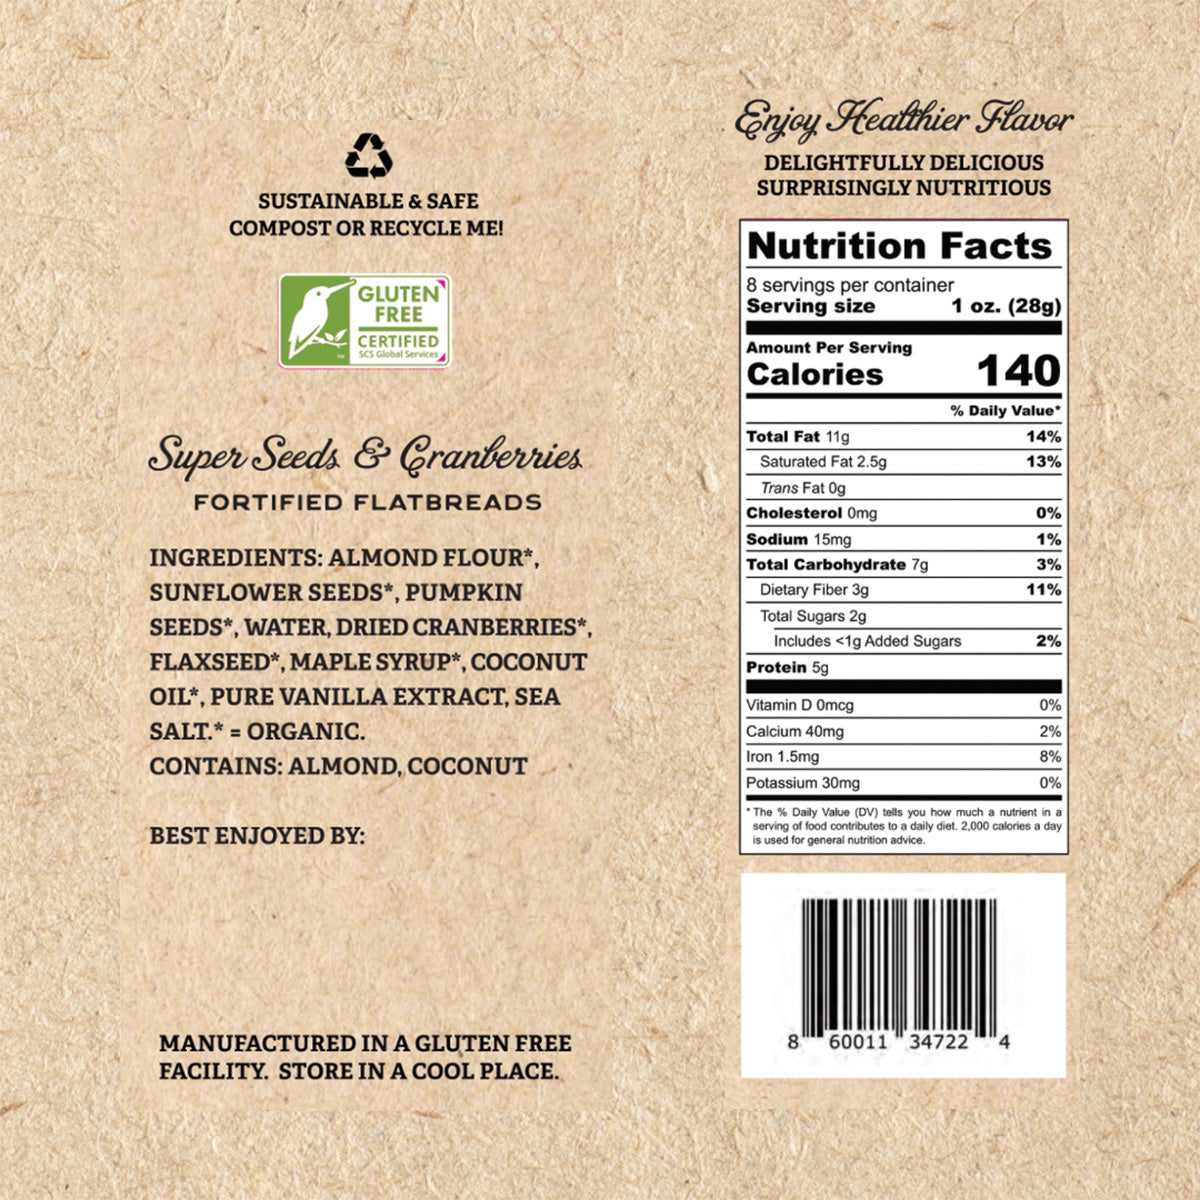 Graphic of the side of the Super Seed & Cranberries fortified flatbread packaging ingredients and nutrition factsshop